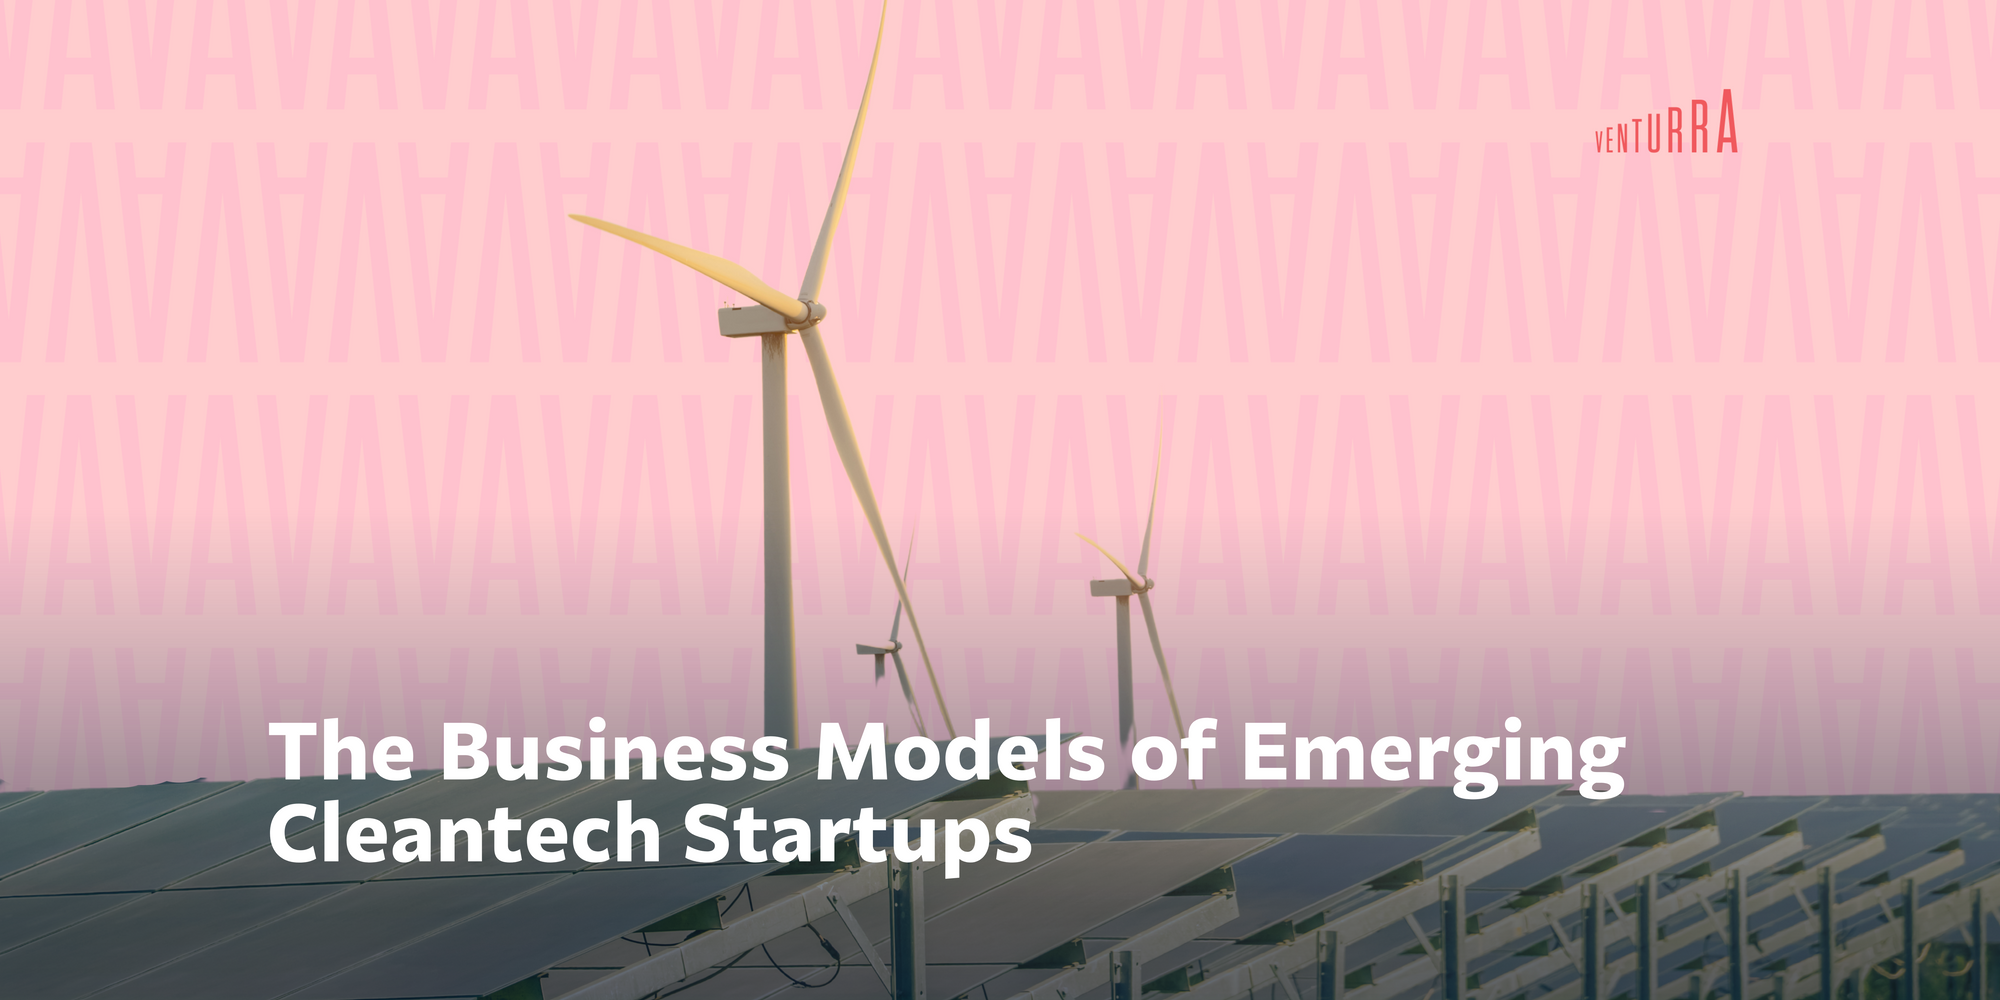 The Business Models of Emerging Cleantech Startups